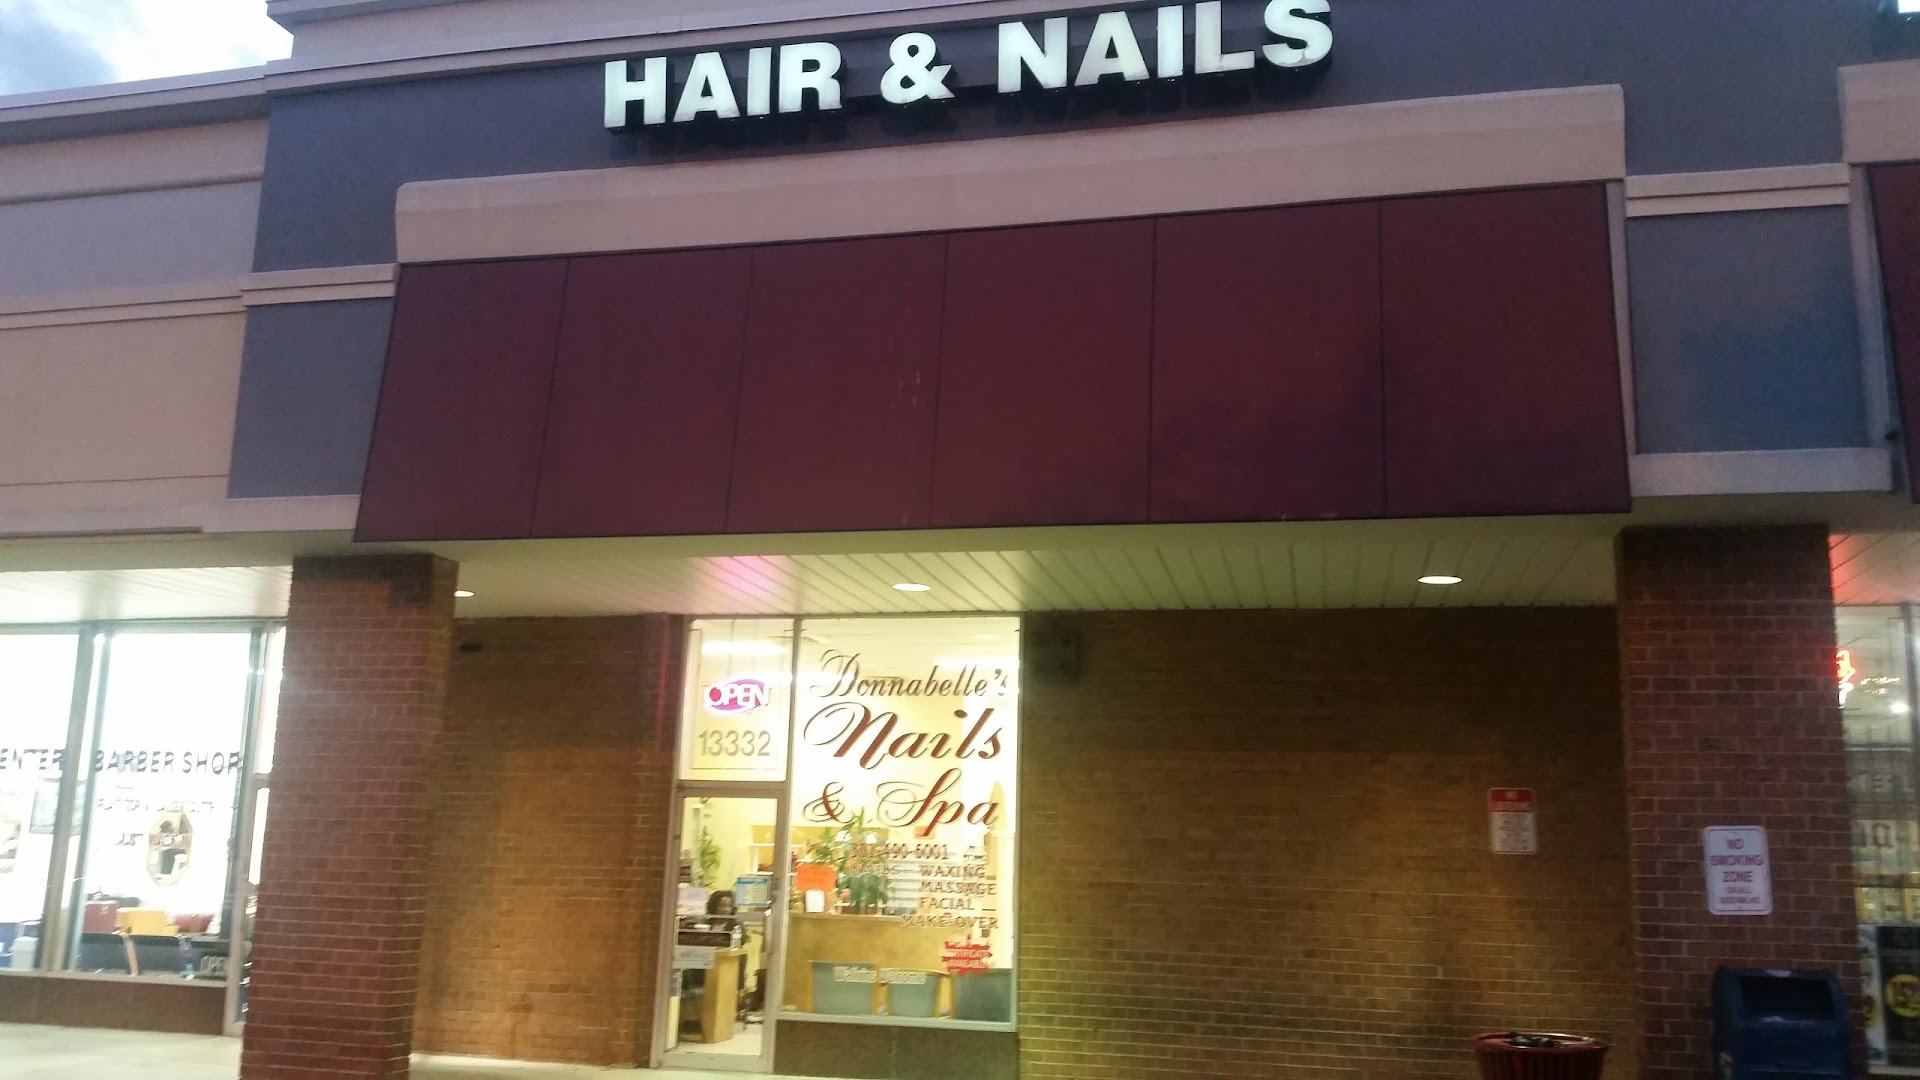 Donnabelle's Nails and Spa